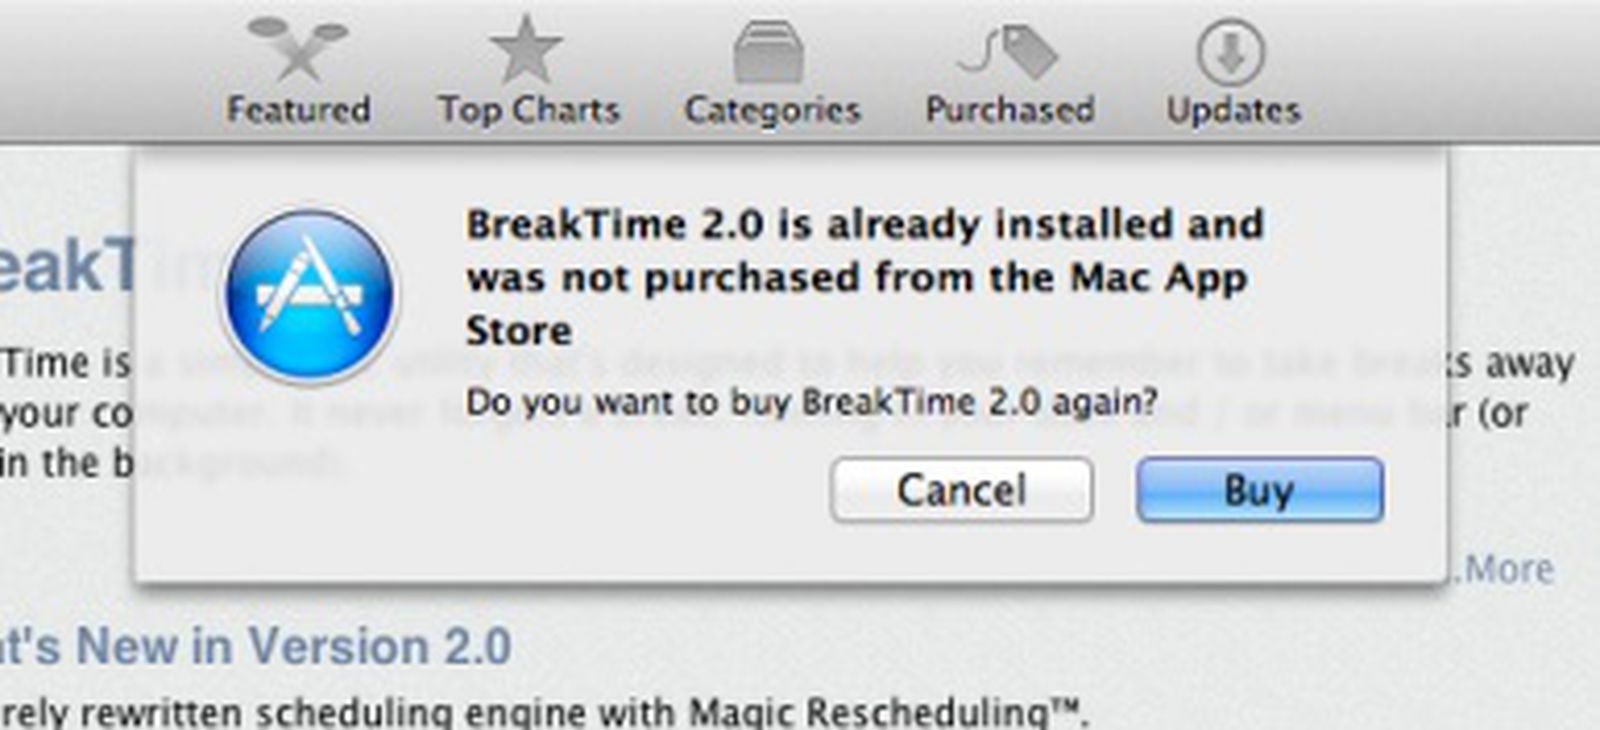 A new version is available. Mac app Store. Message Box app already Running.